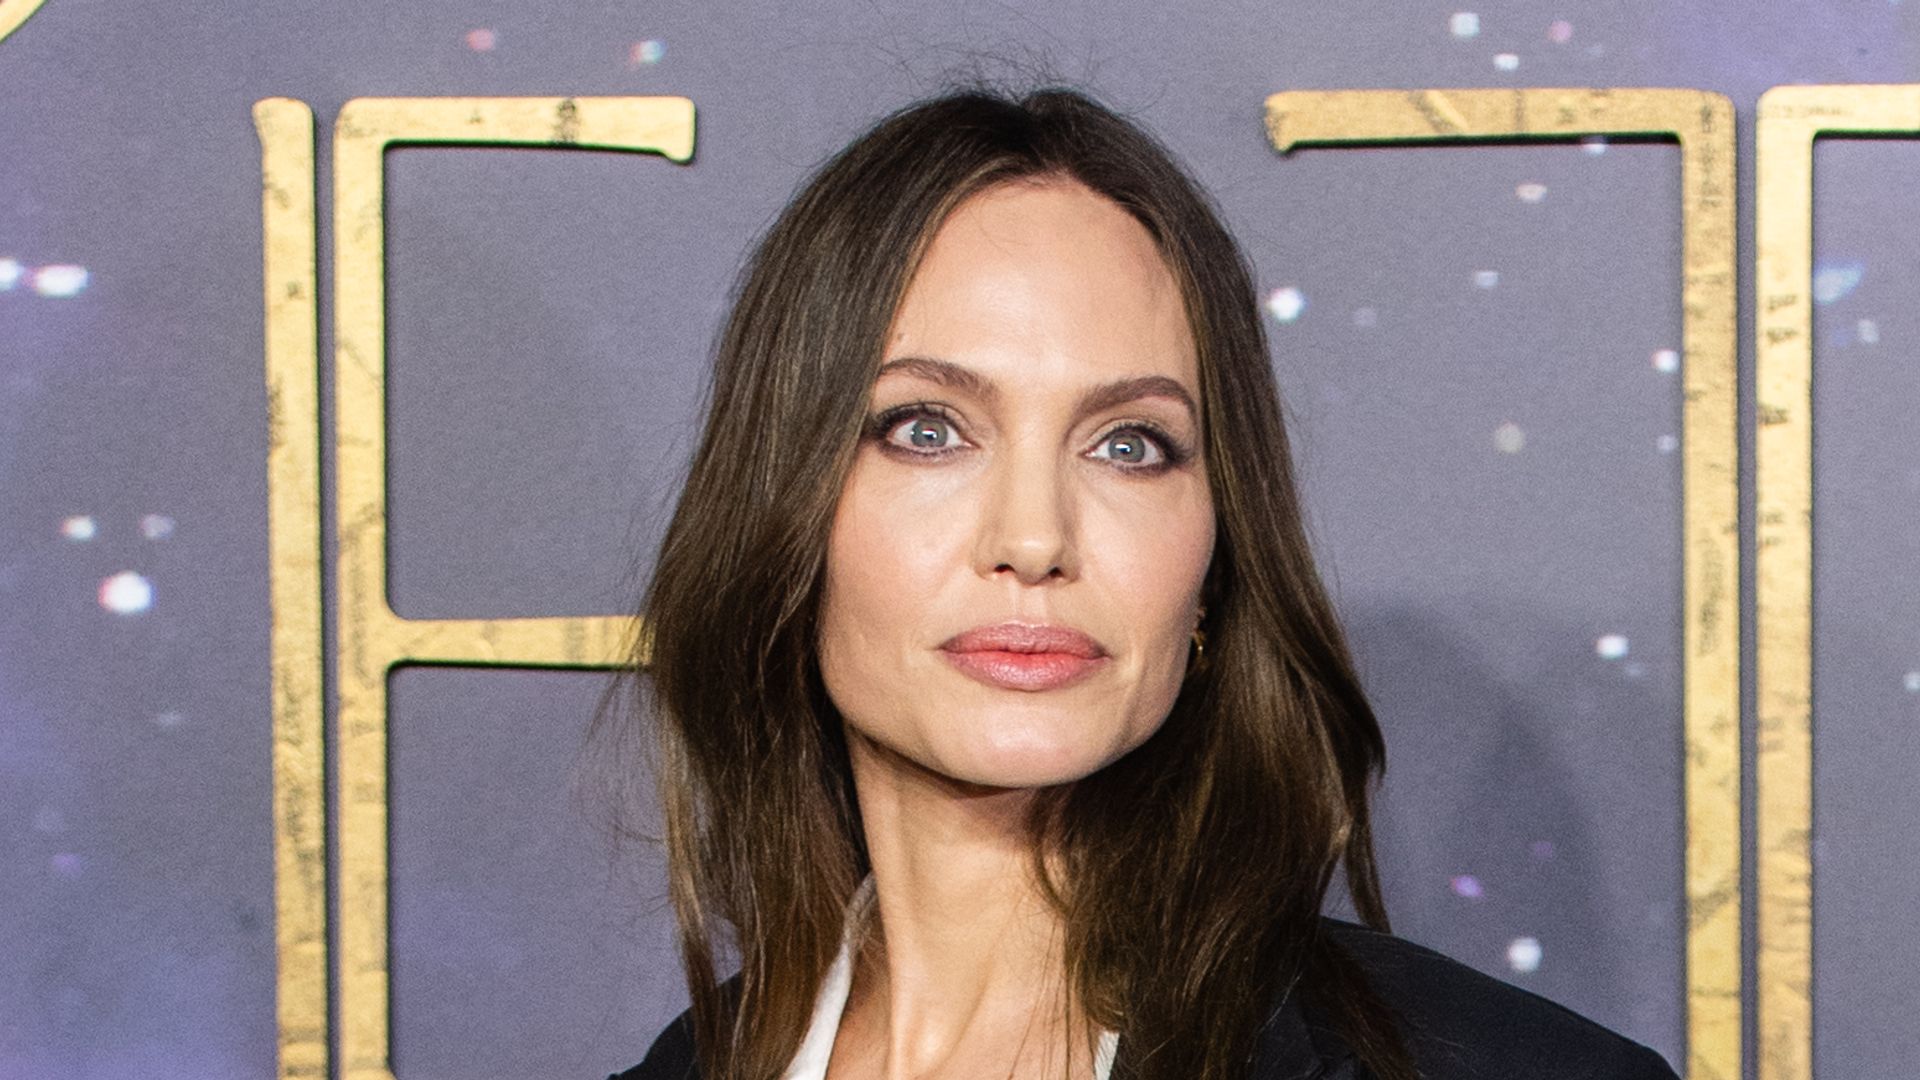 Angelina Jolie attends the "The Eternals" UK Premiere at BFI IMAX Waterloo on October 27, 2021 in London, England